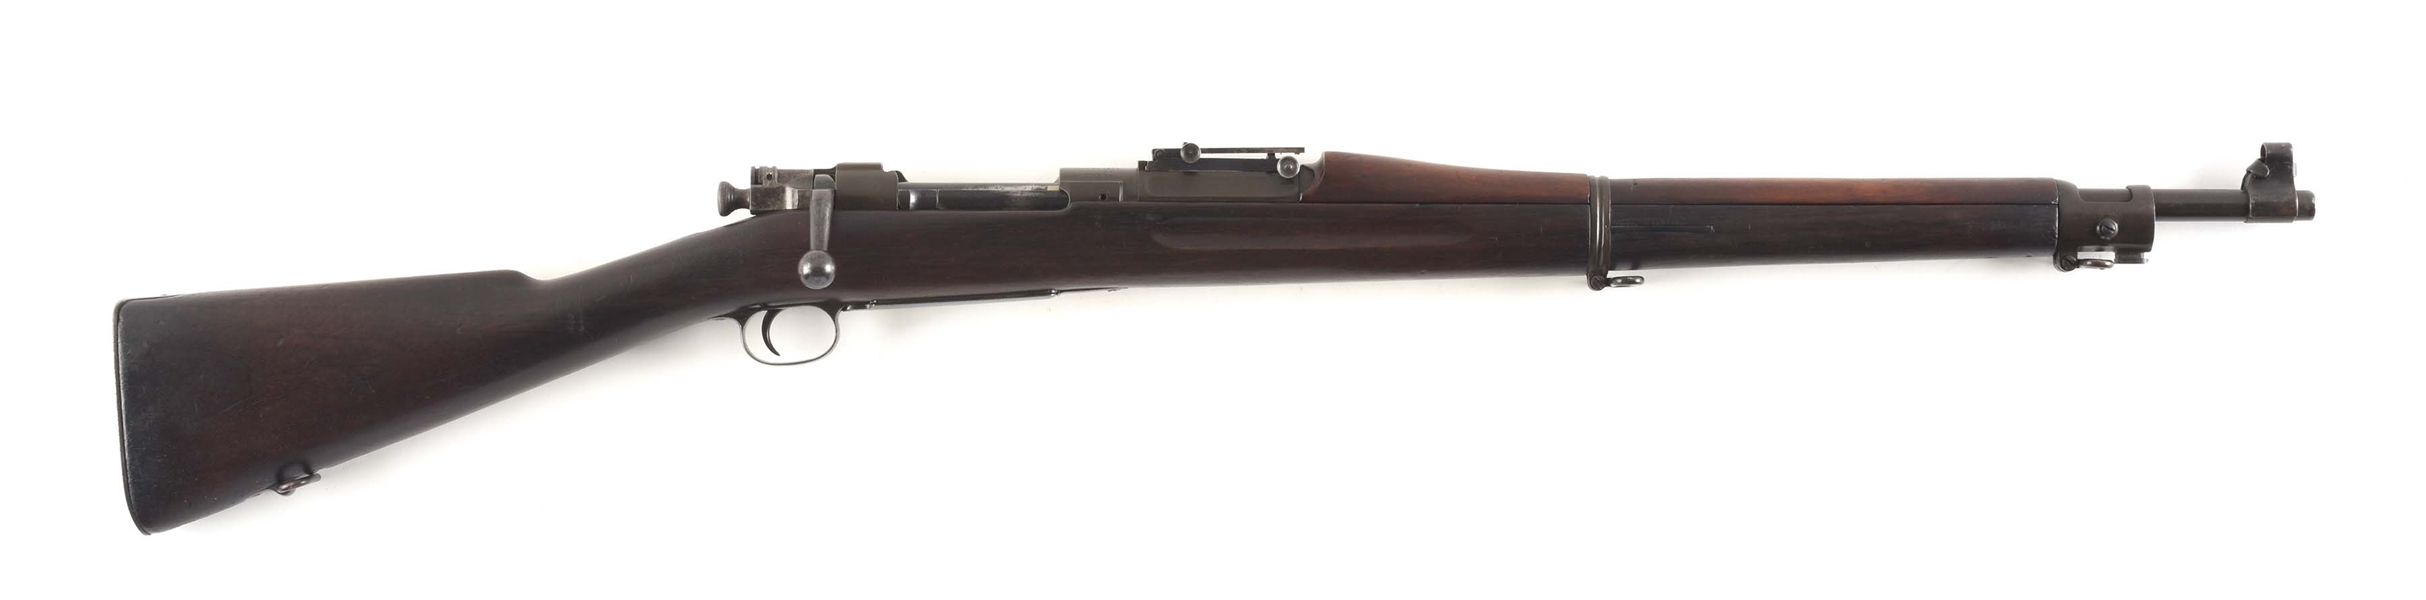 (C) EARLY U.S. SPRINGFIELD 1903/1905 BOLT ACTION RIFLE.